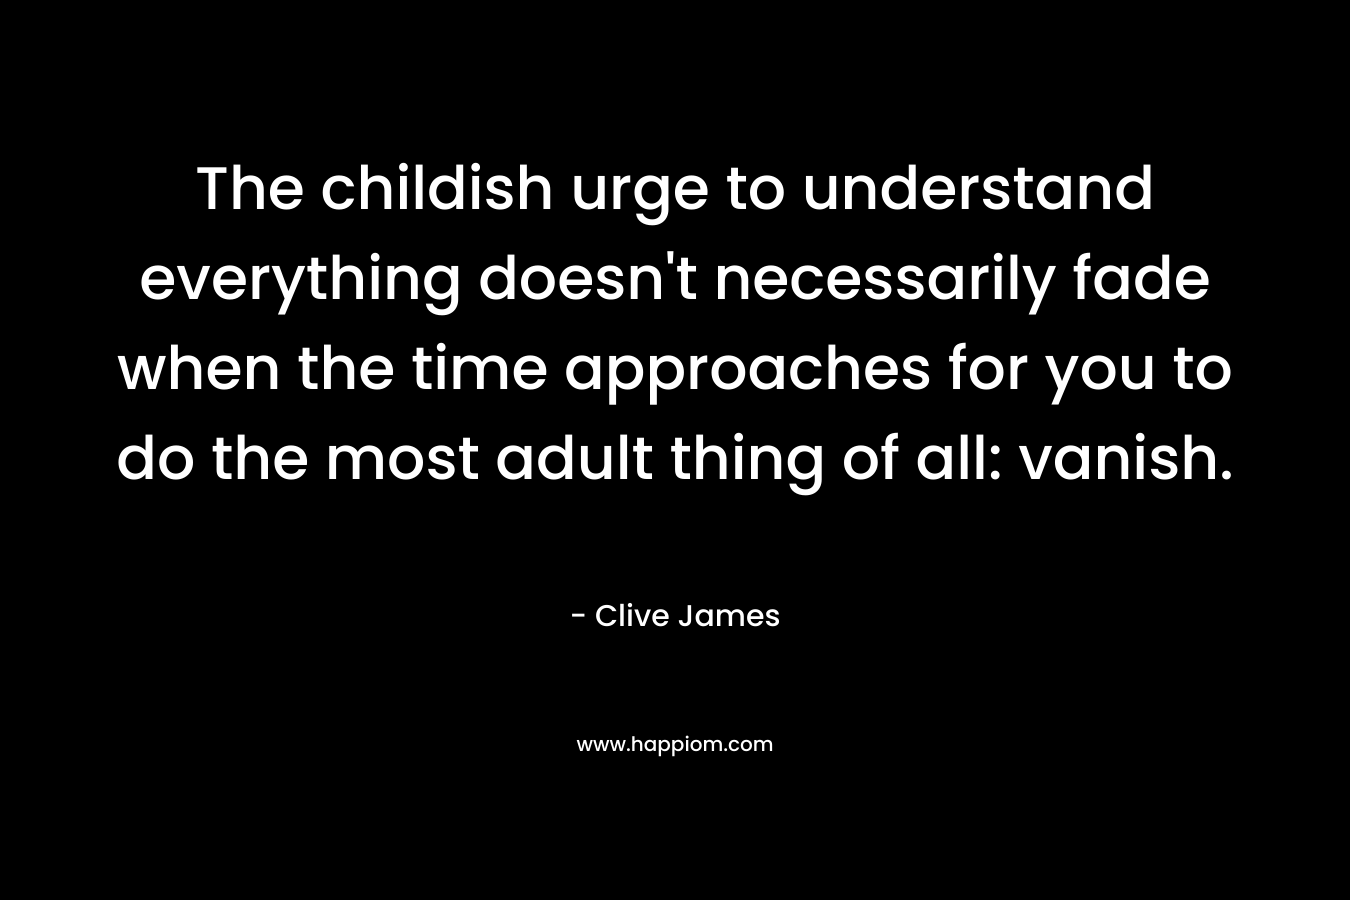 The childish urge to understand everything doesn’t necessarily fade when the time approaches for you to do the most adult thing of all: vanish. – Clive James